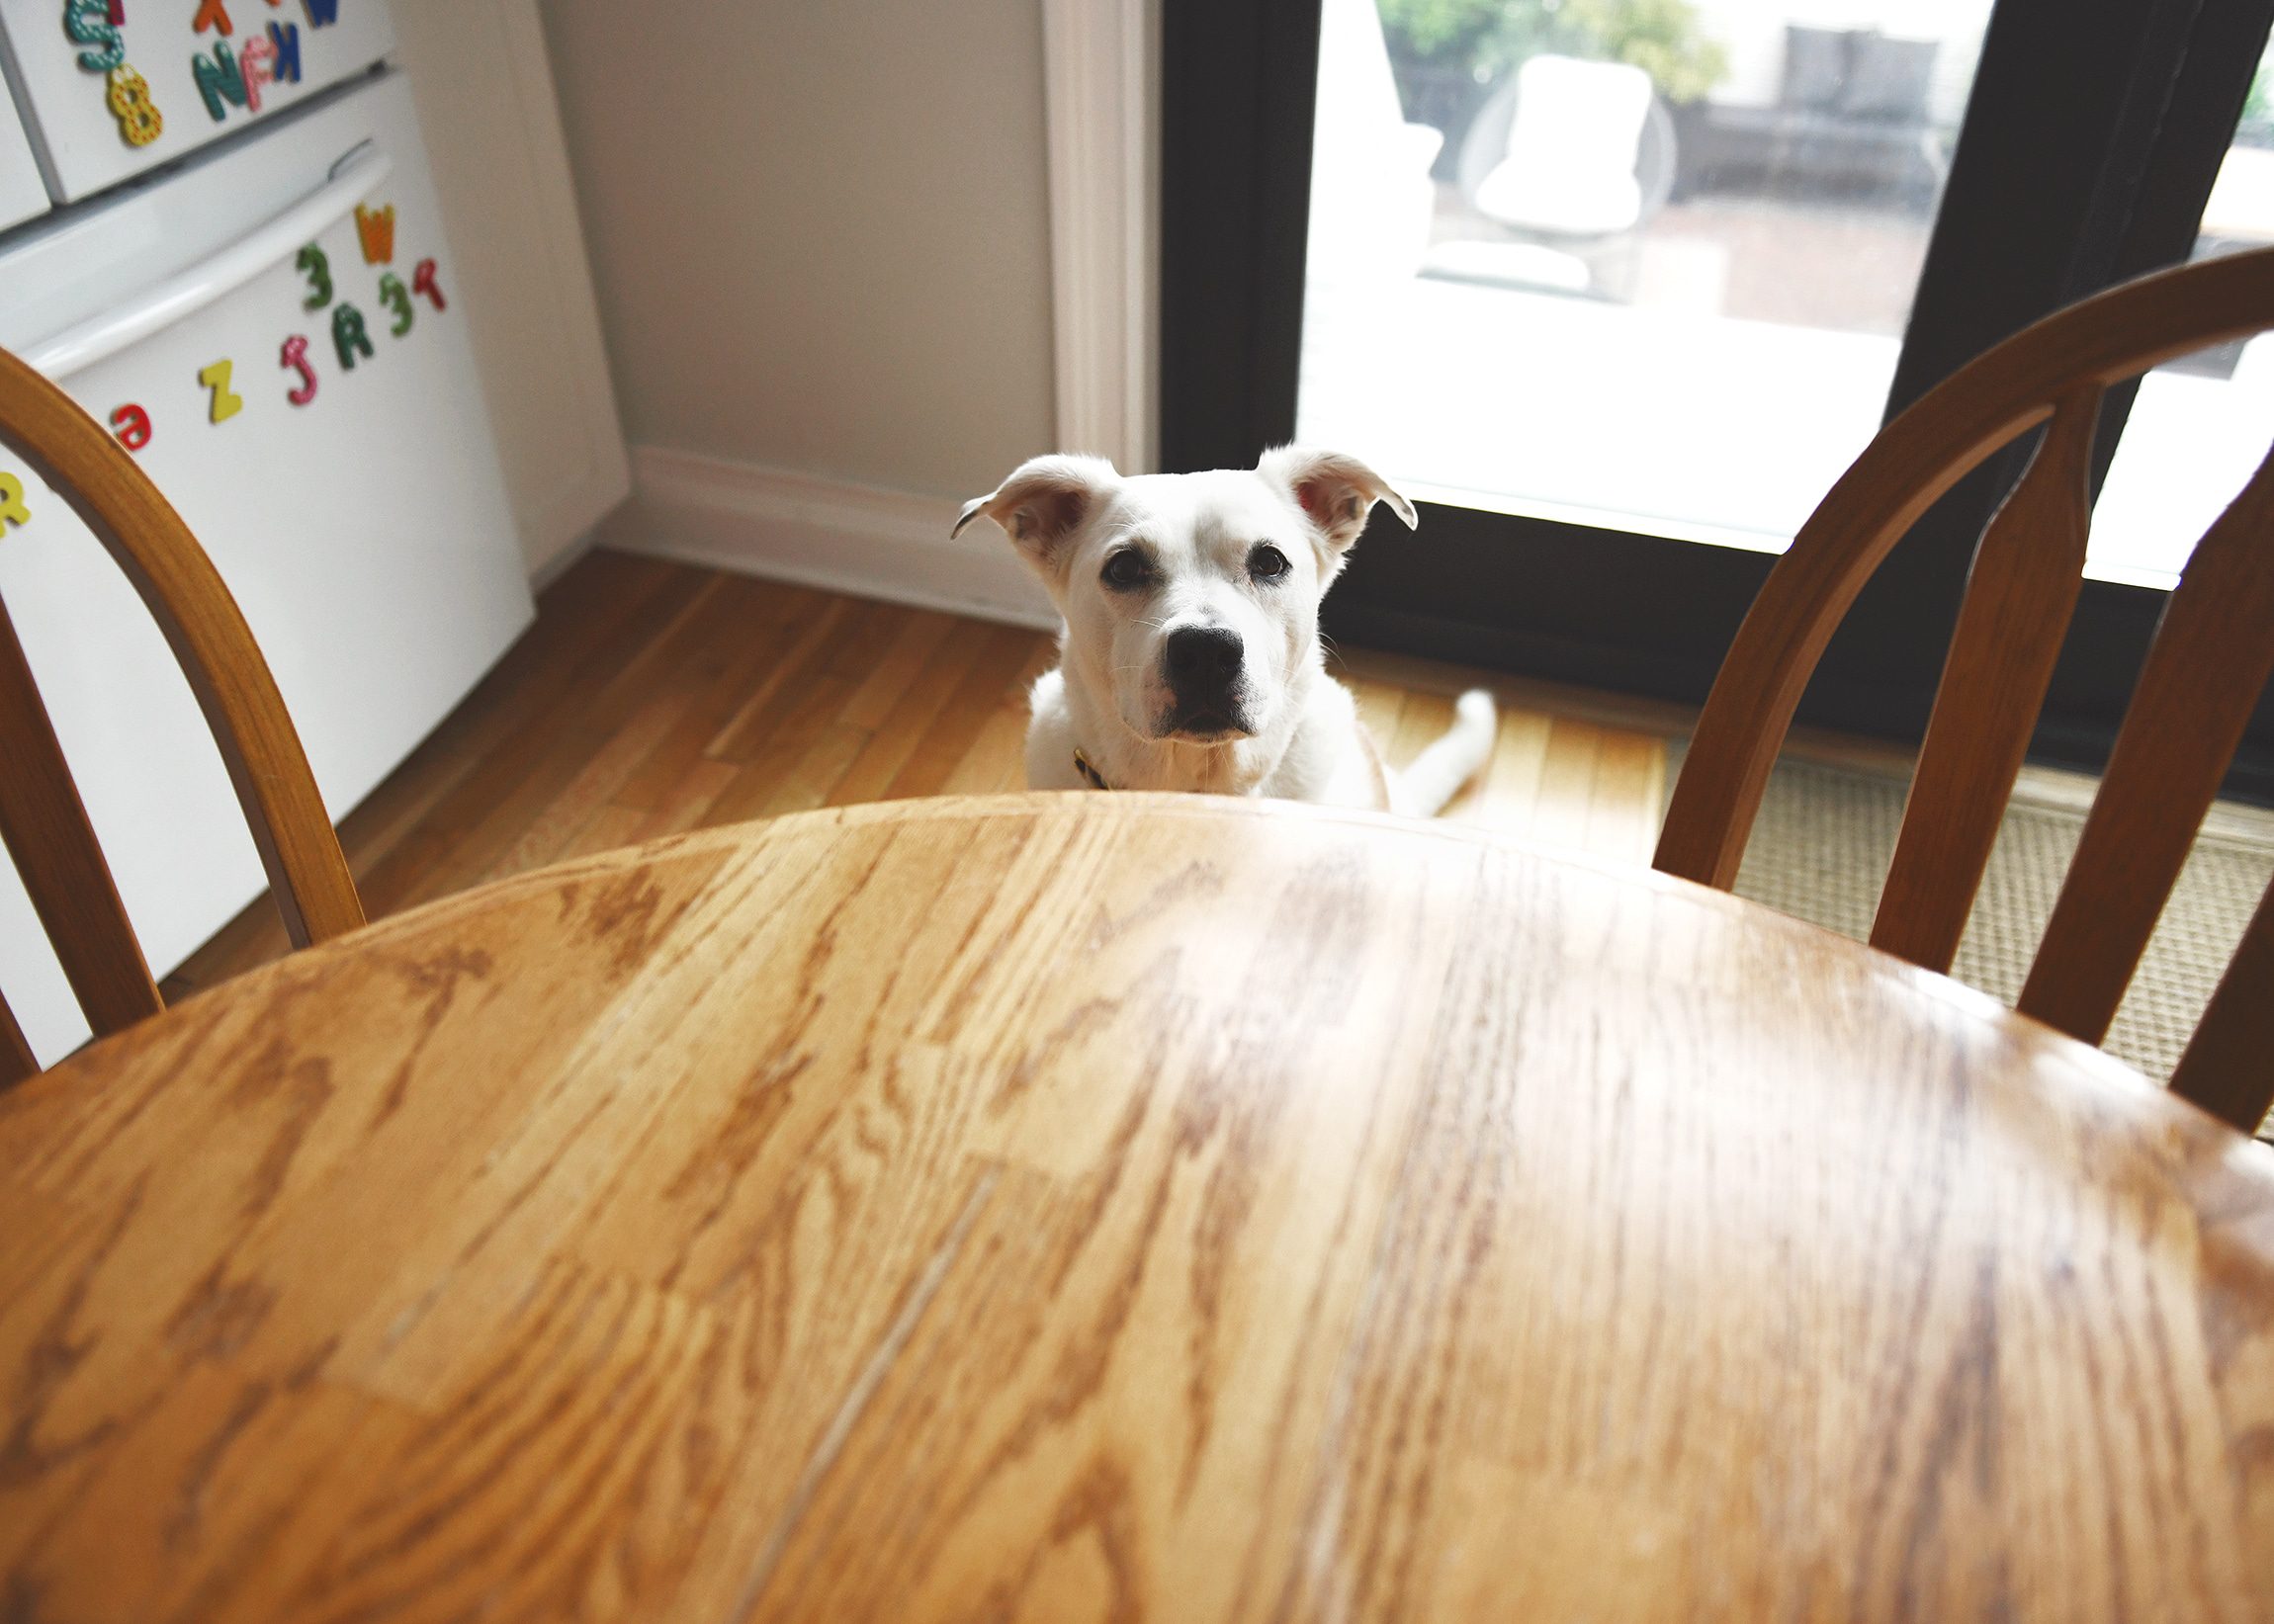 Catfish waiting patiently for a treat | via Yellow Brick Home